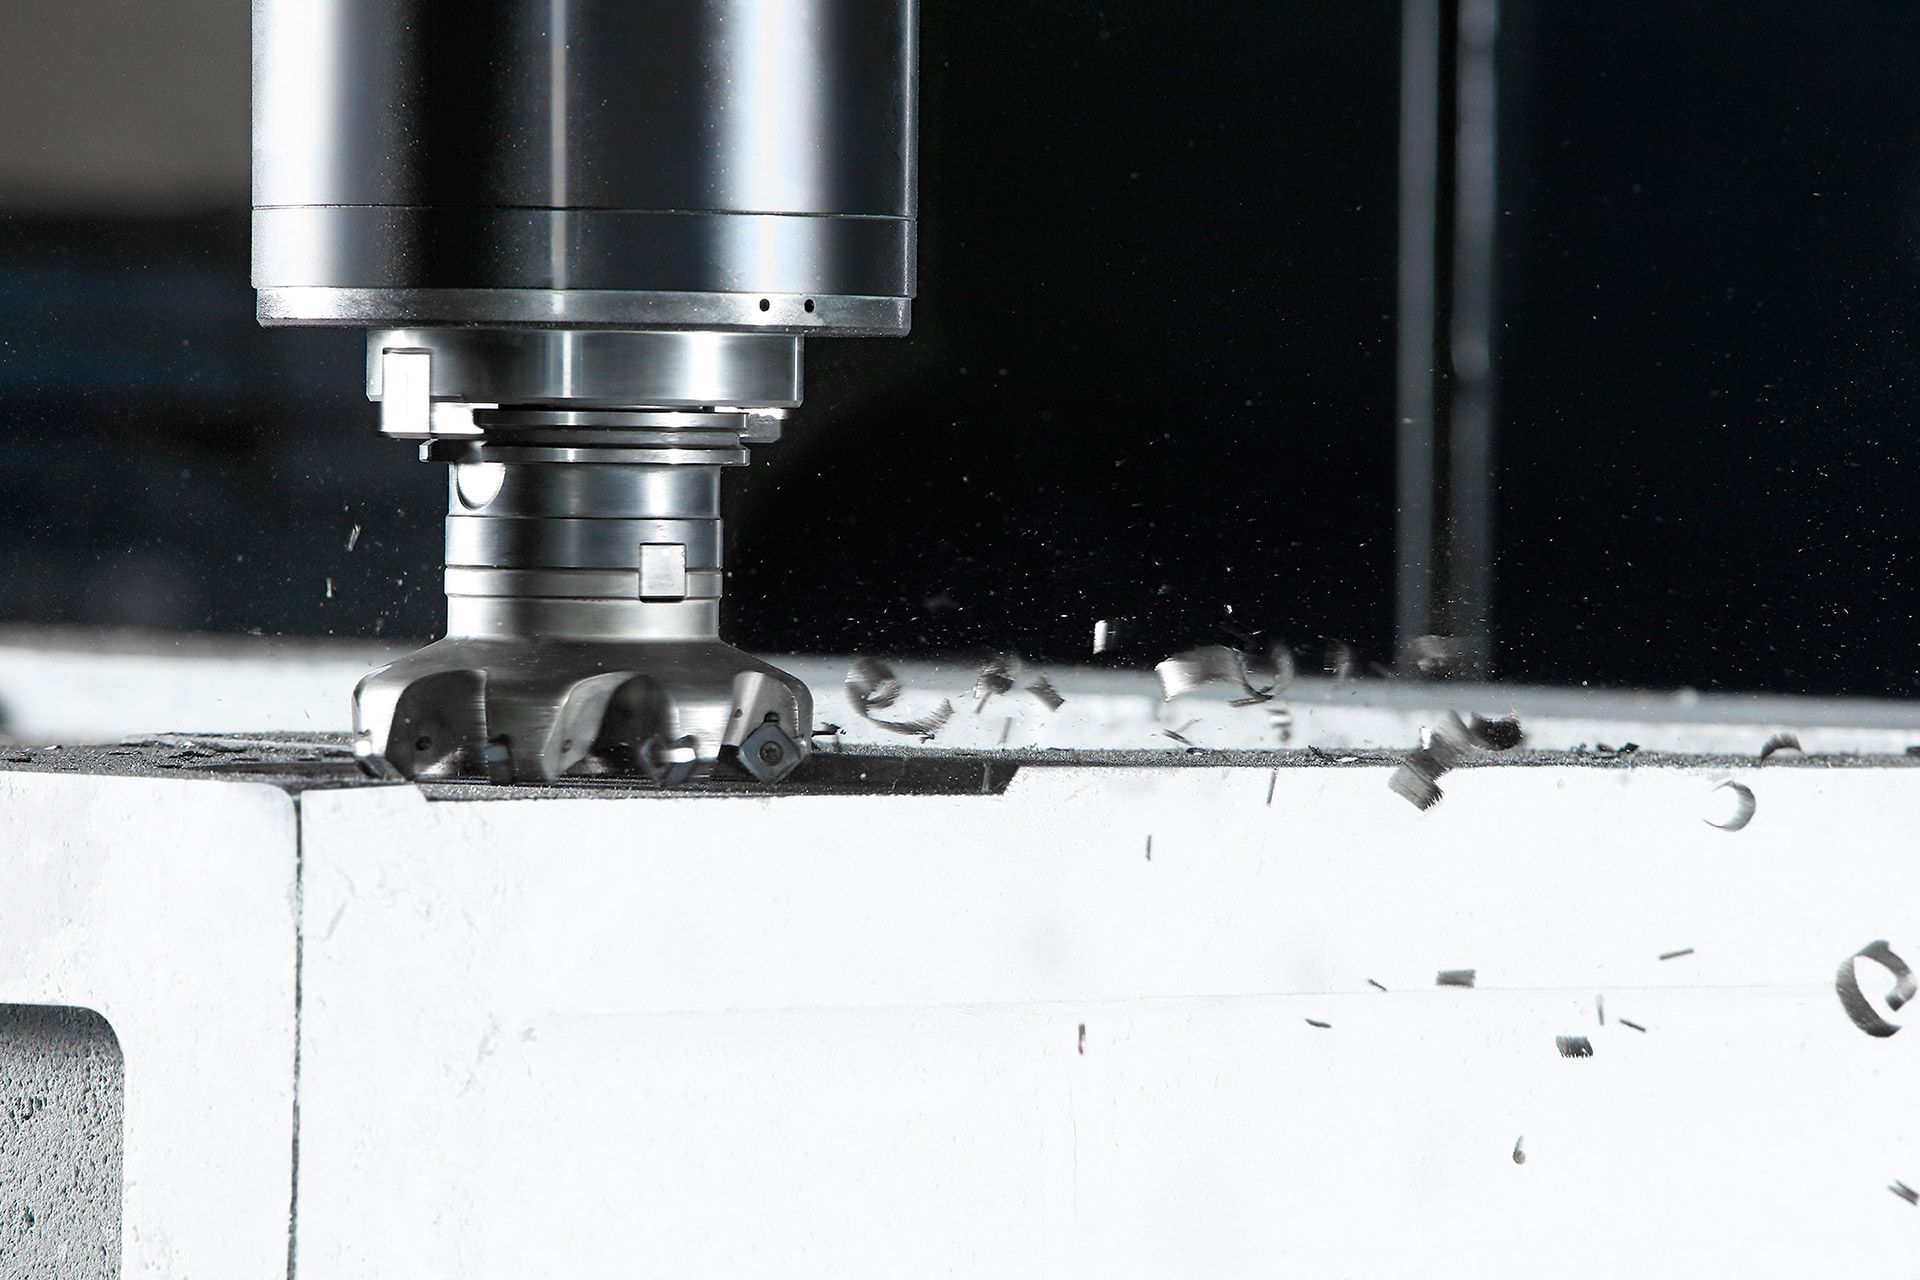 Goimek stands out as a specialist in precision and large-scale machining services, catering to industries for high value-added parts with exacting demands